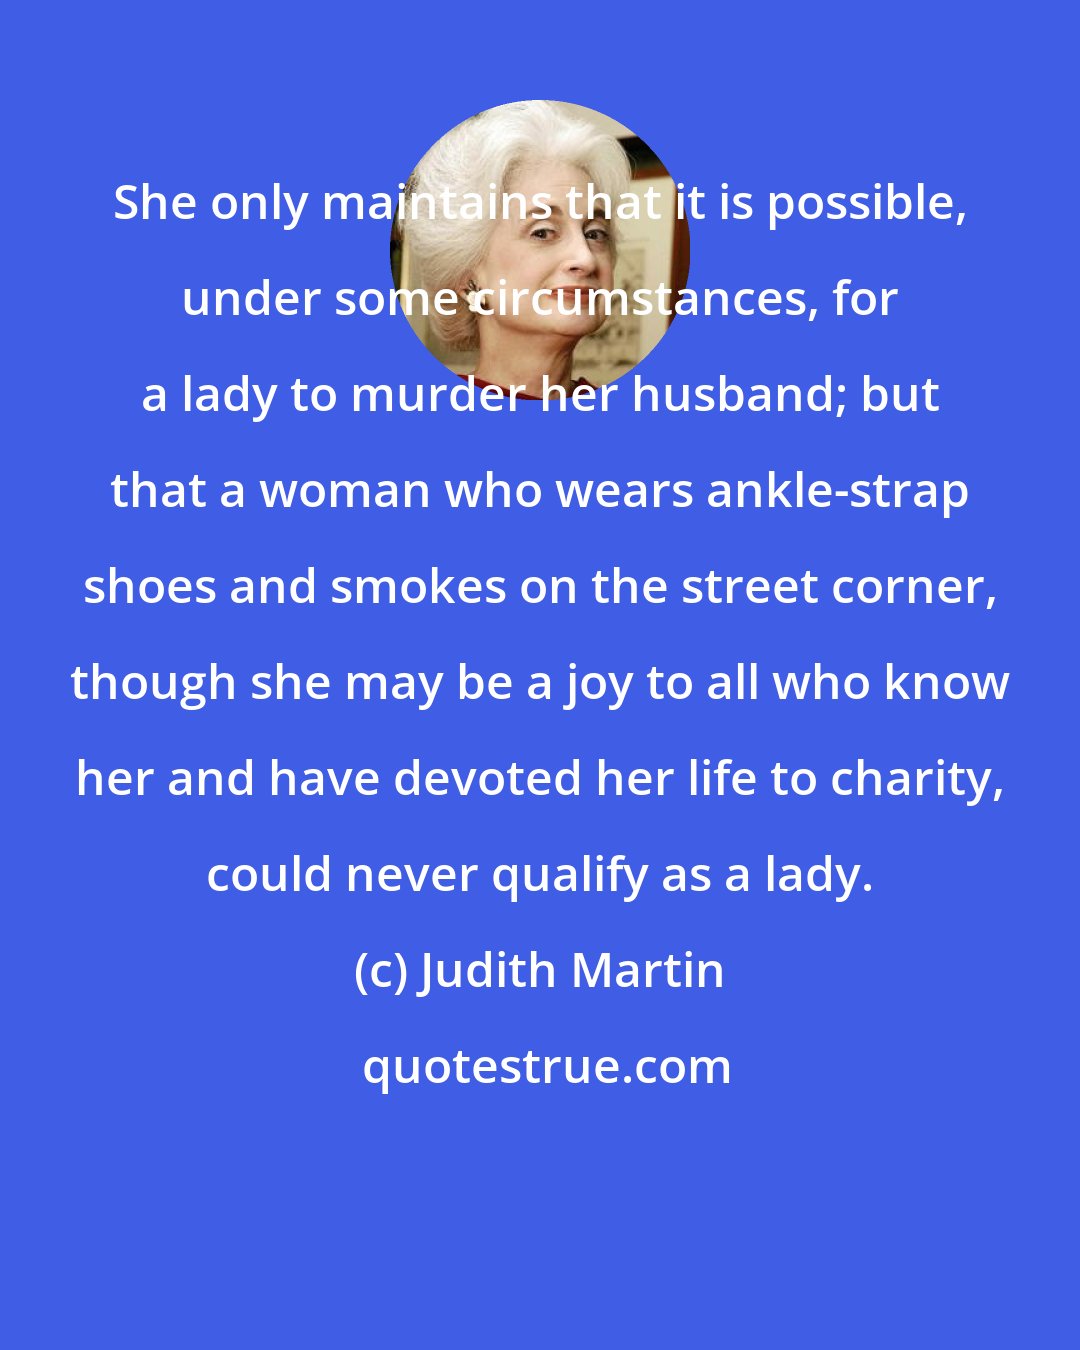 Judith Martin: She only maintains that it is possible, under some circumstances, for a lady to murder her husband; but that a woman who wears ankle-strap shoes and smokes on the street corner, though she may be a joy to all who know her and have devoted her life to charity, could never qualify as a lady.